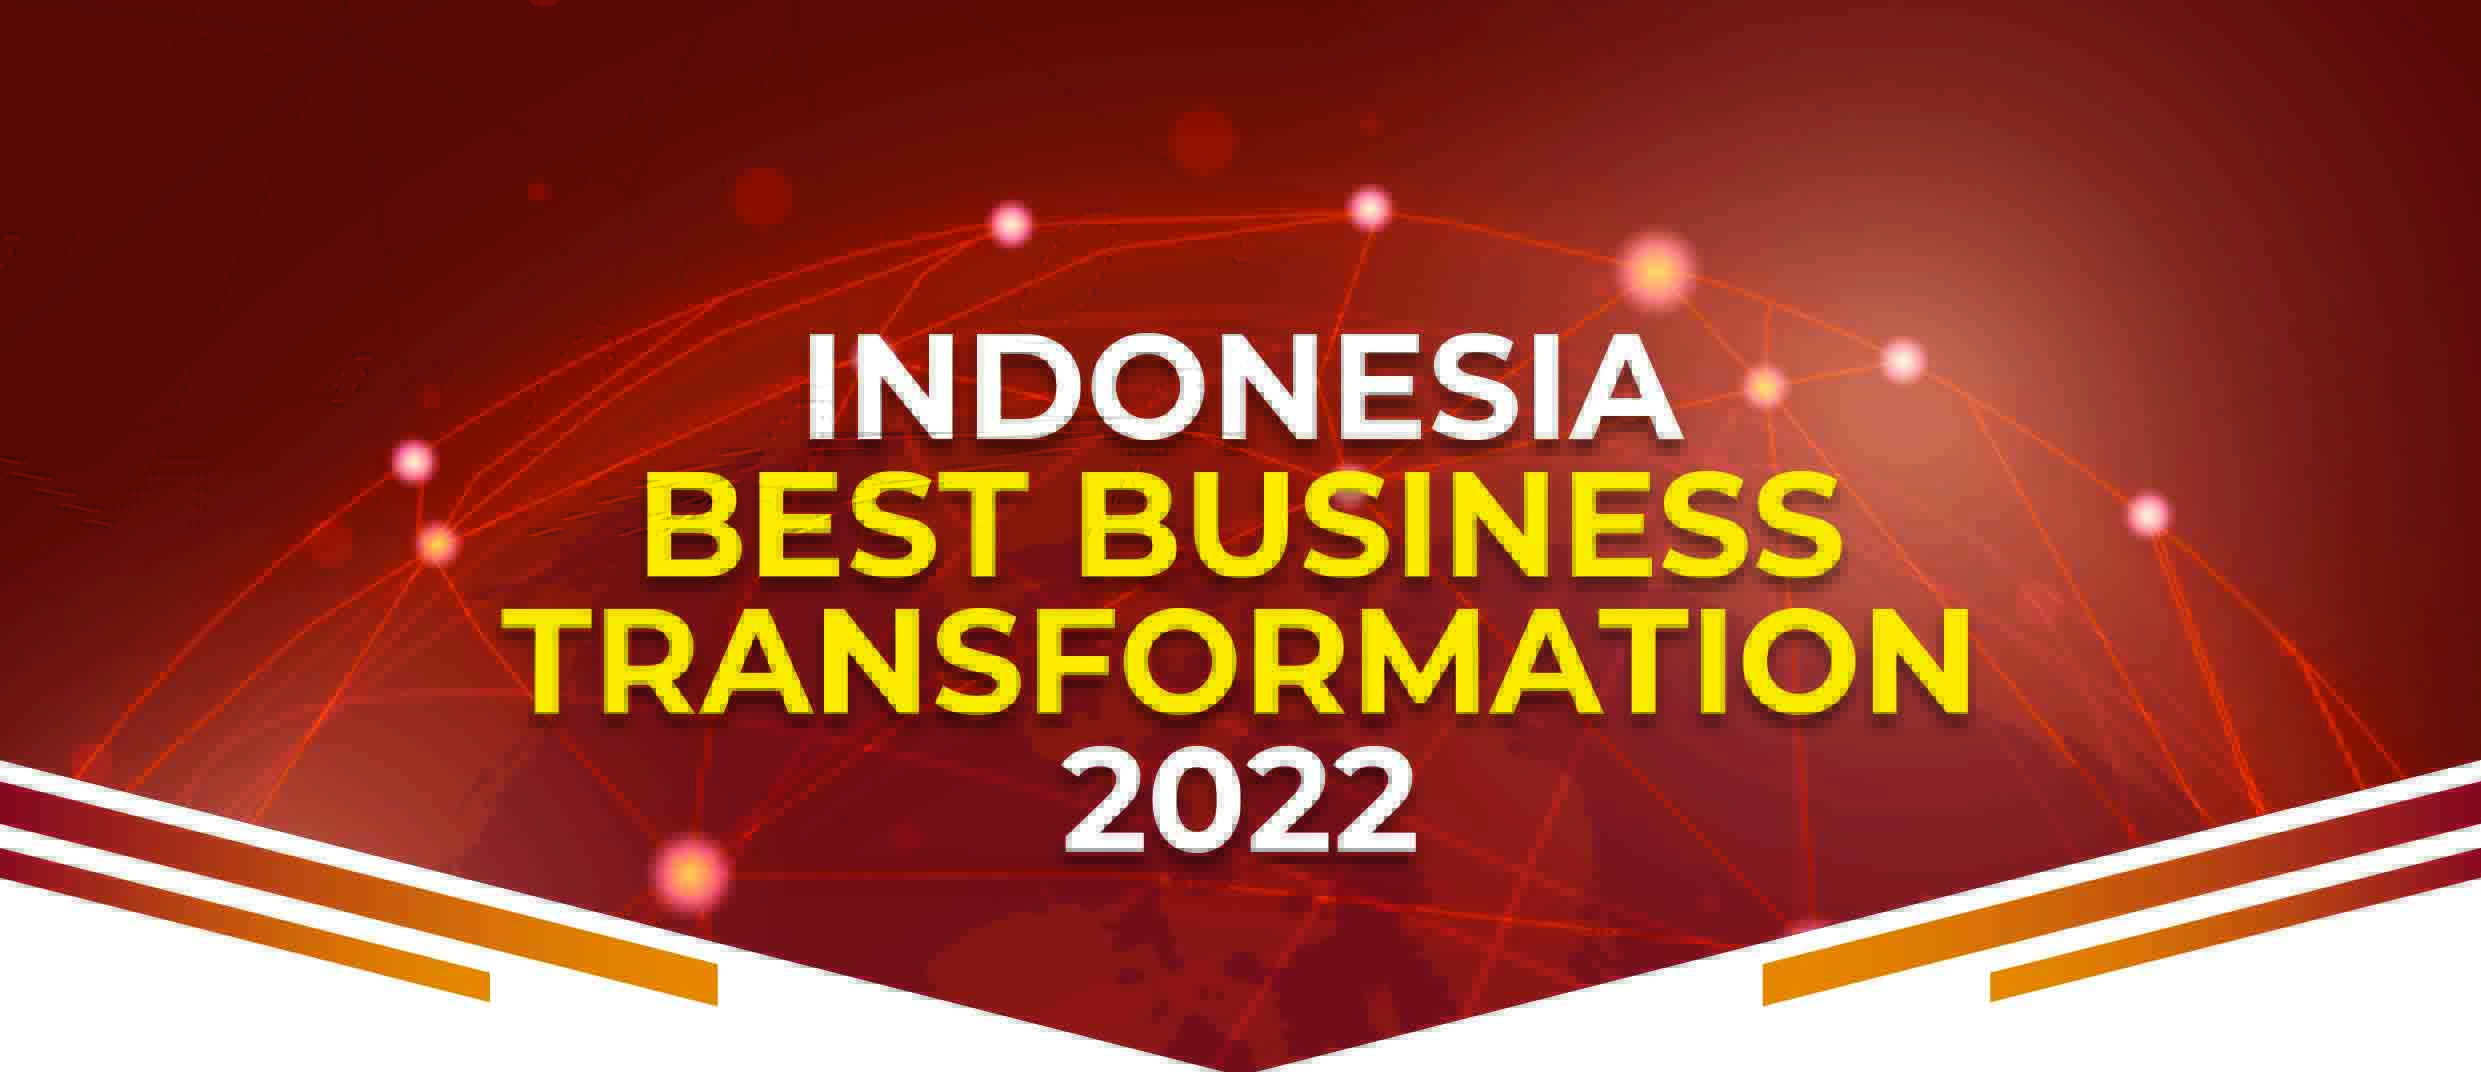 Indonesia Best Business Transformation 2022